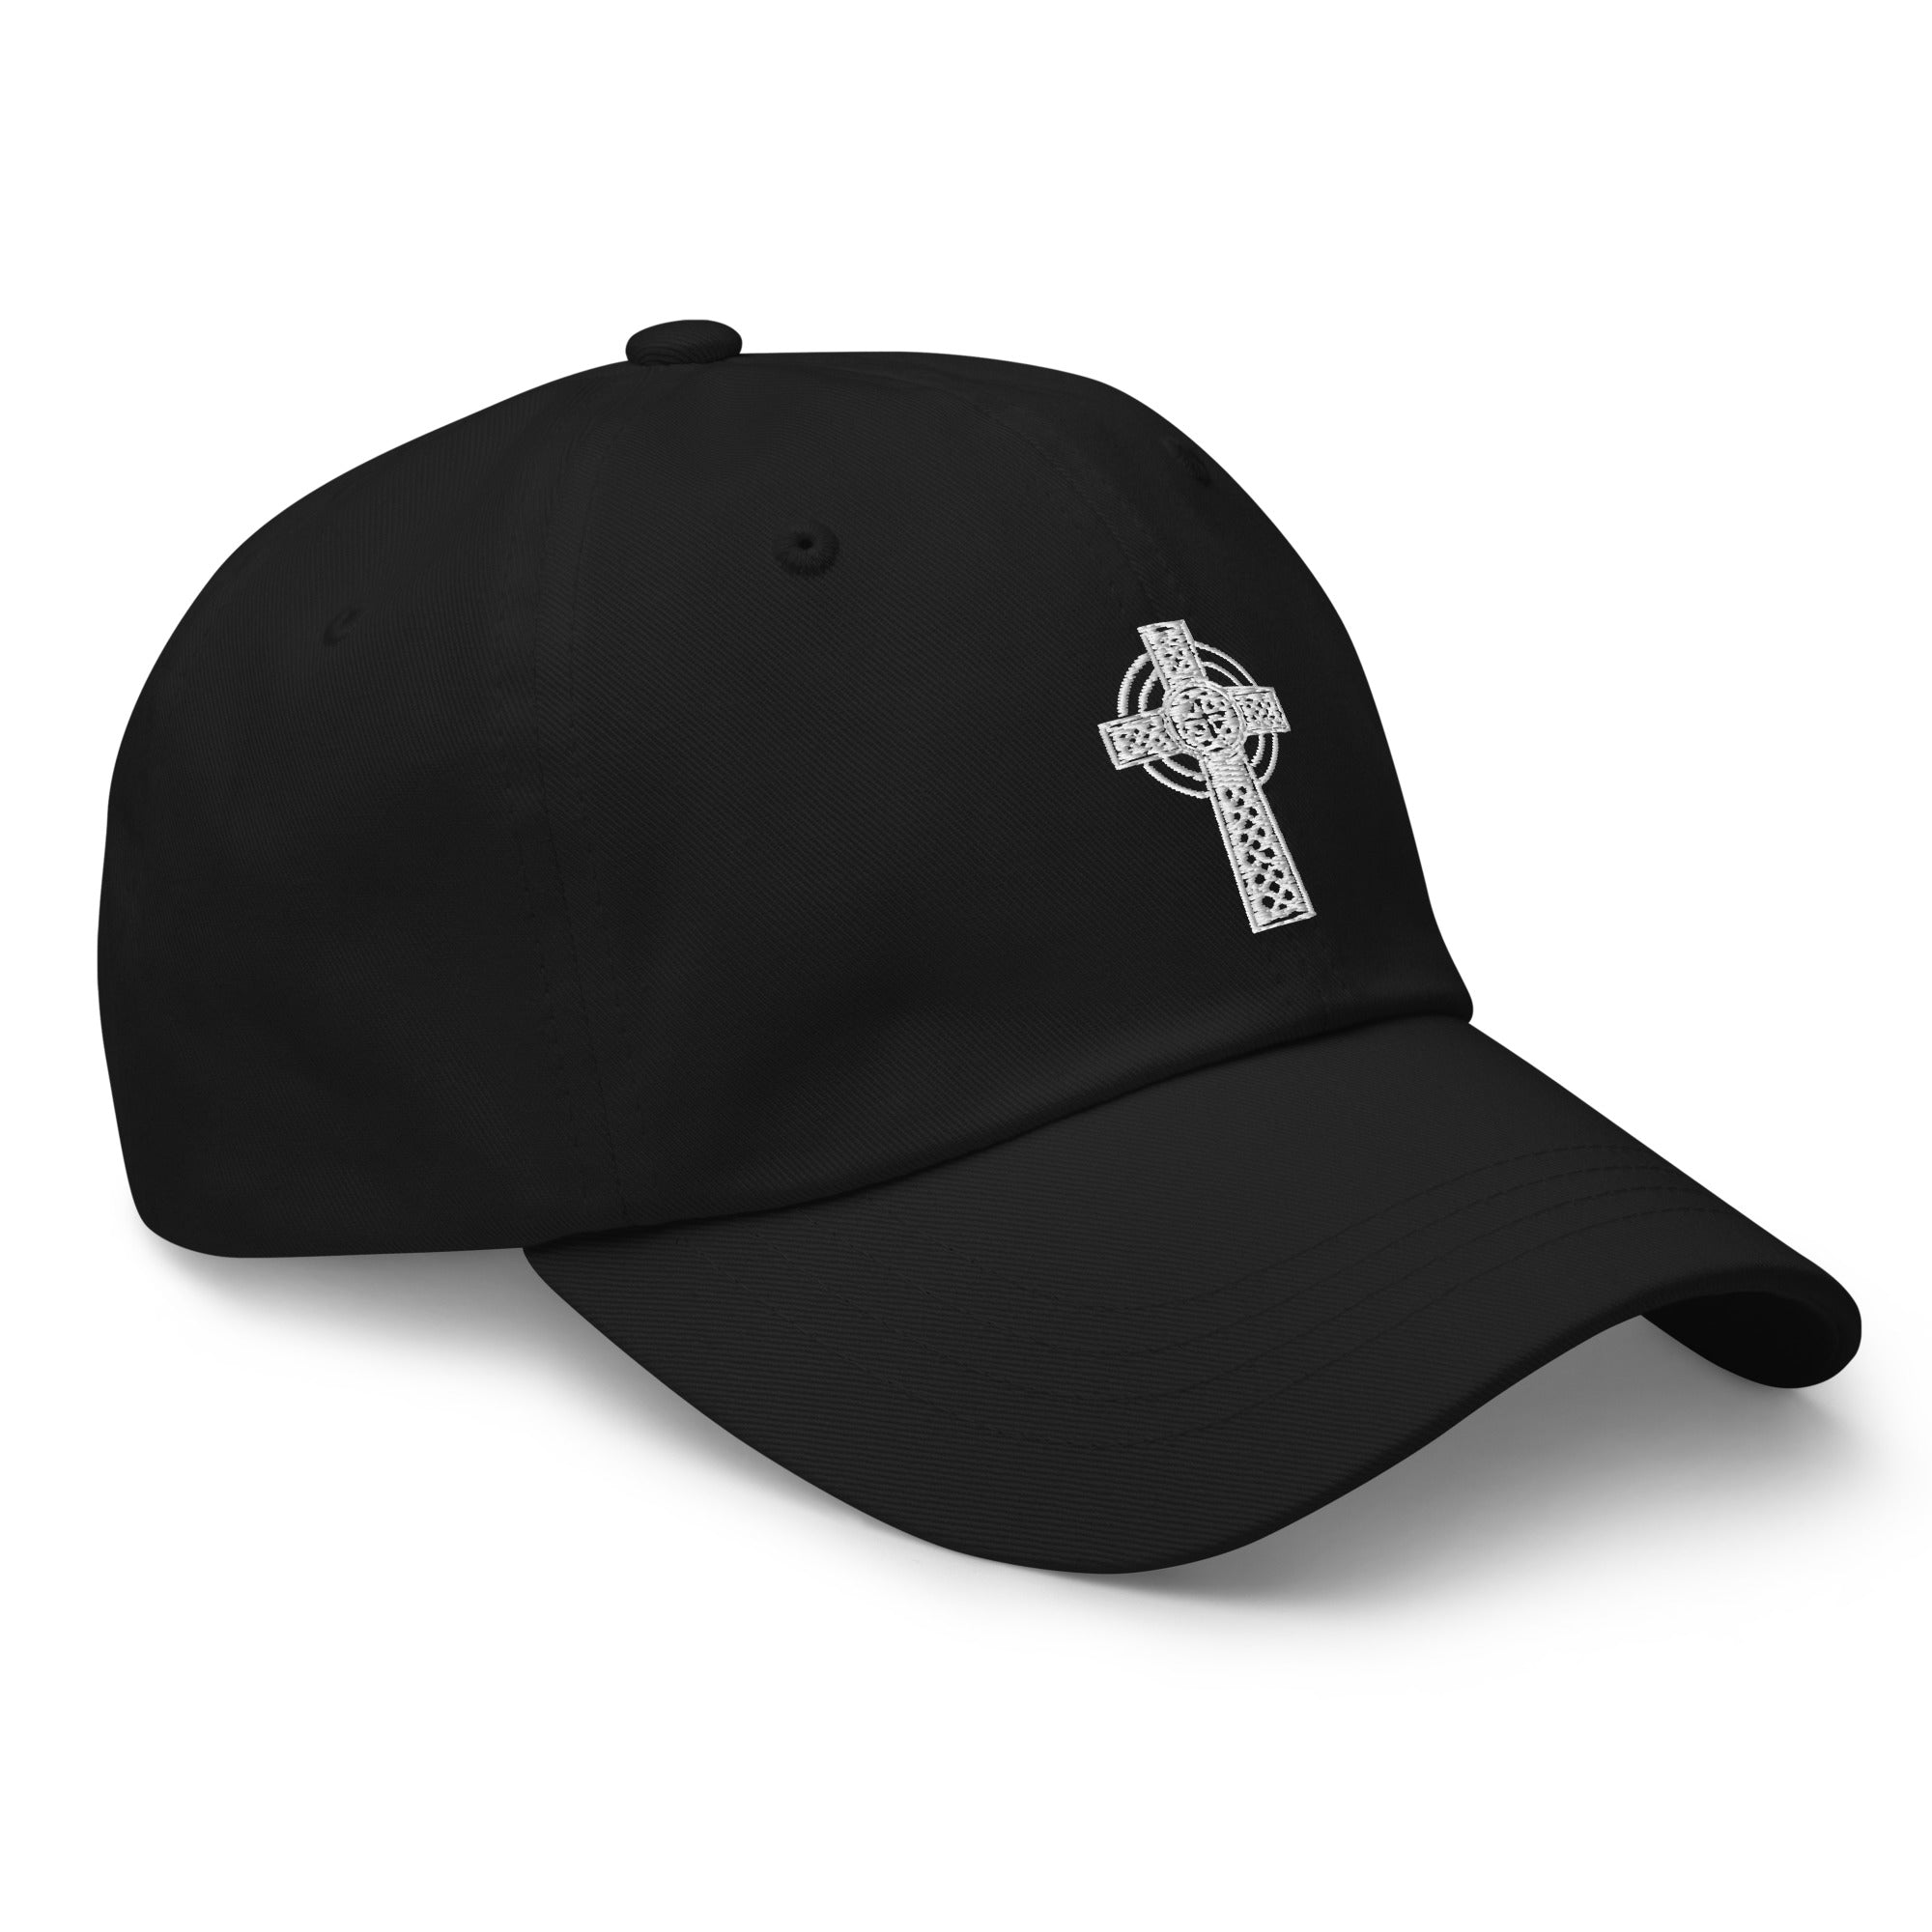 Old Celtic Cross Circle of Light Embroidered Baseball Cap Dad hat - Edge of Life Designs